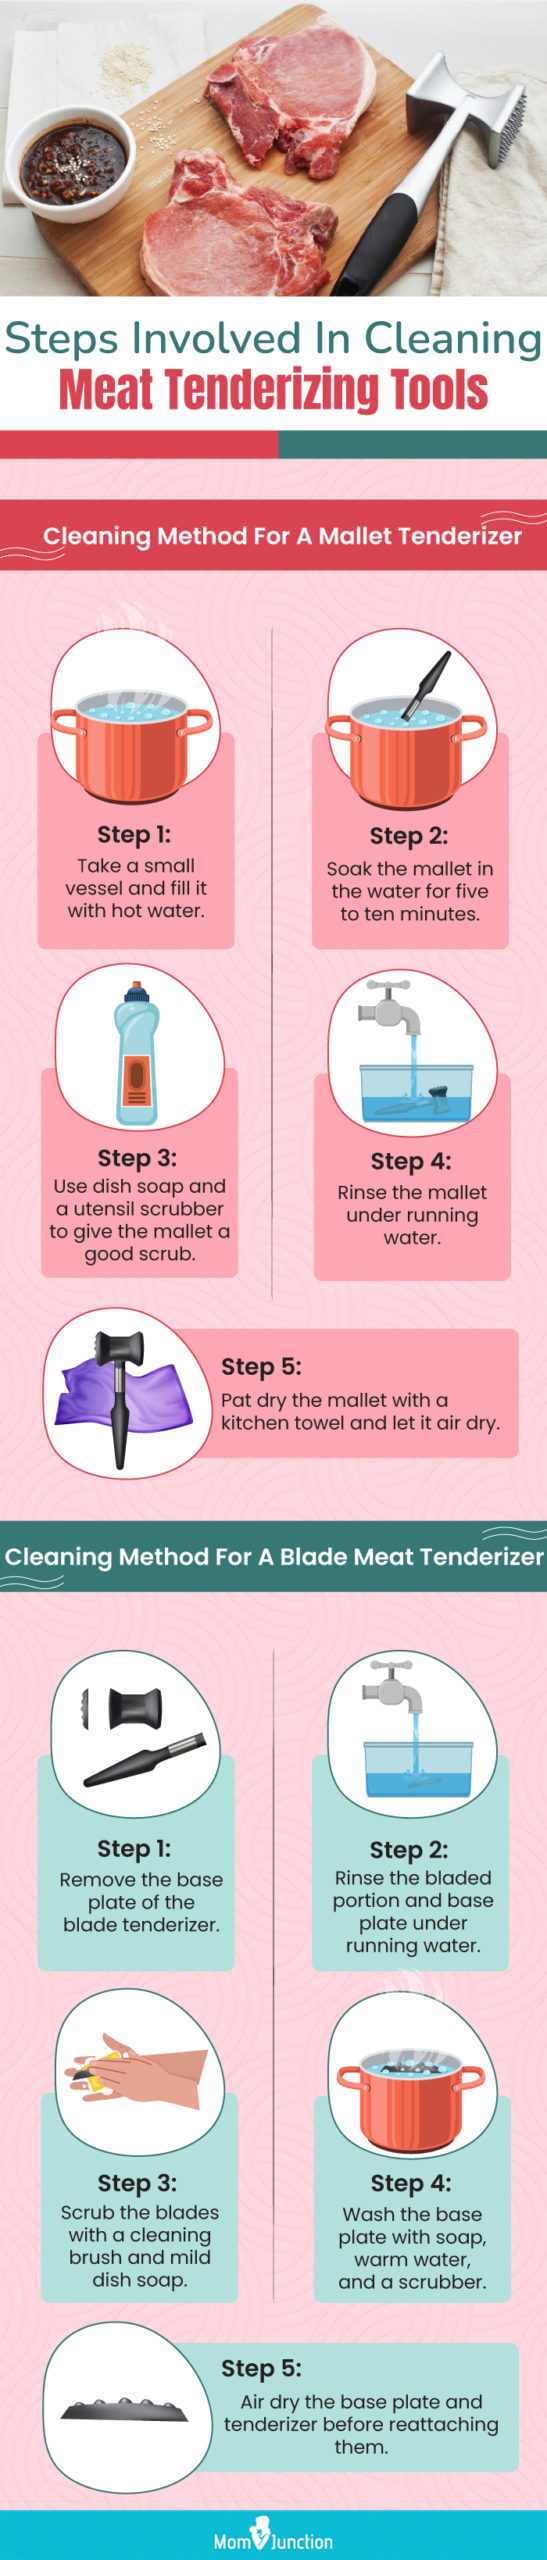 Steps Involved In Cleaning Meat Tenderizing (infographic)